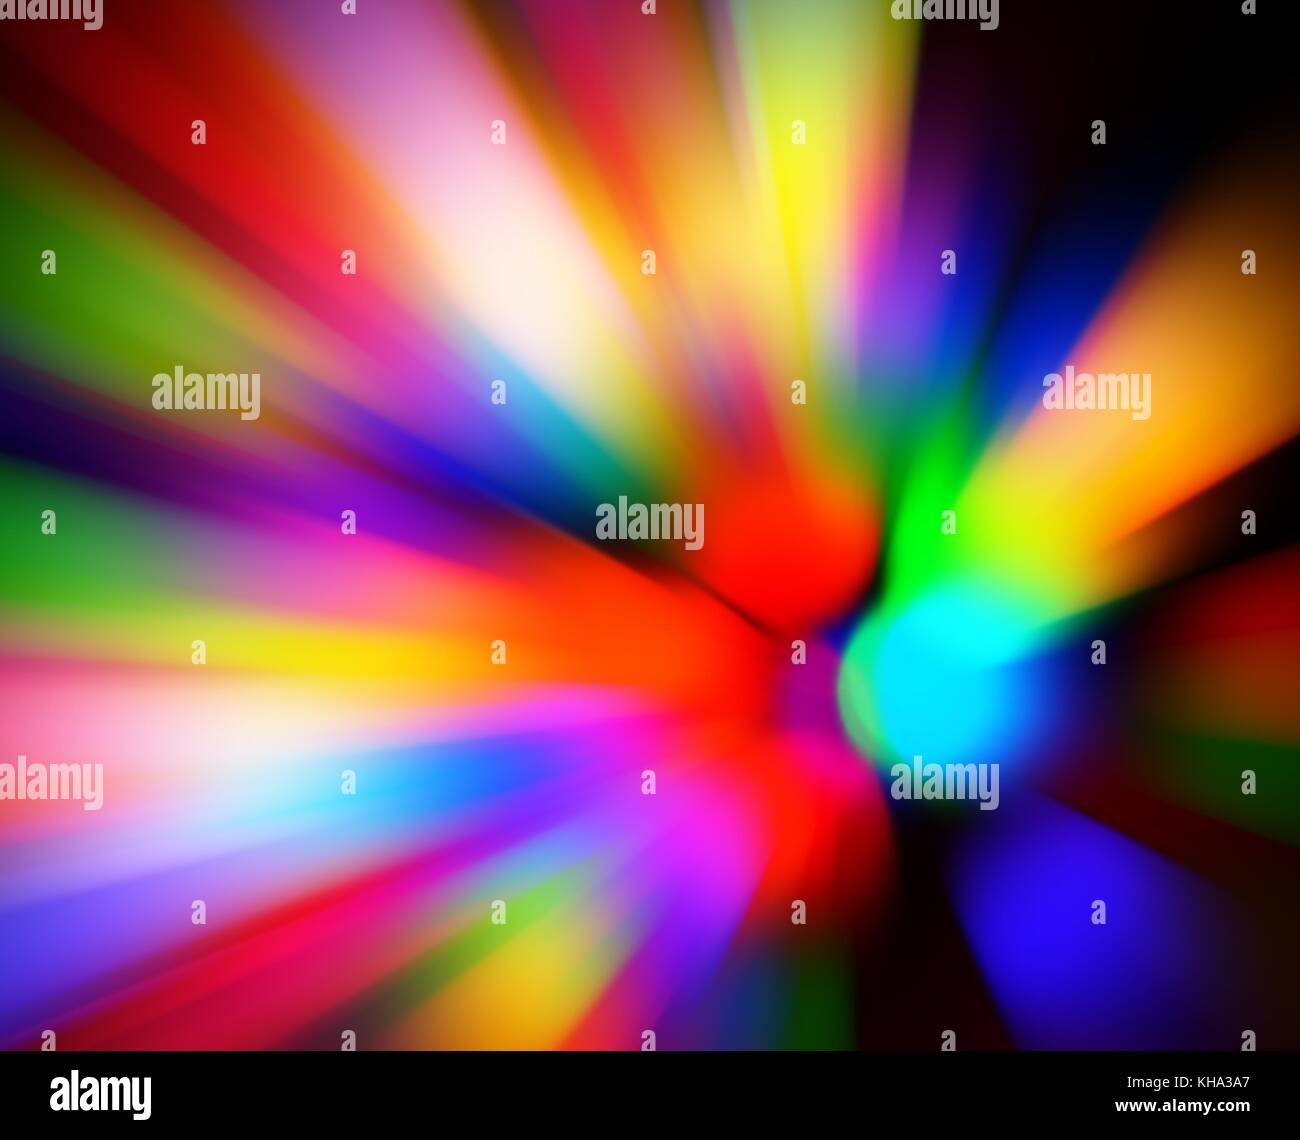 Multi color zoom blurred bokeh lights on a black background. Stock Photo